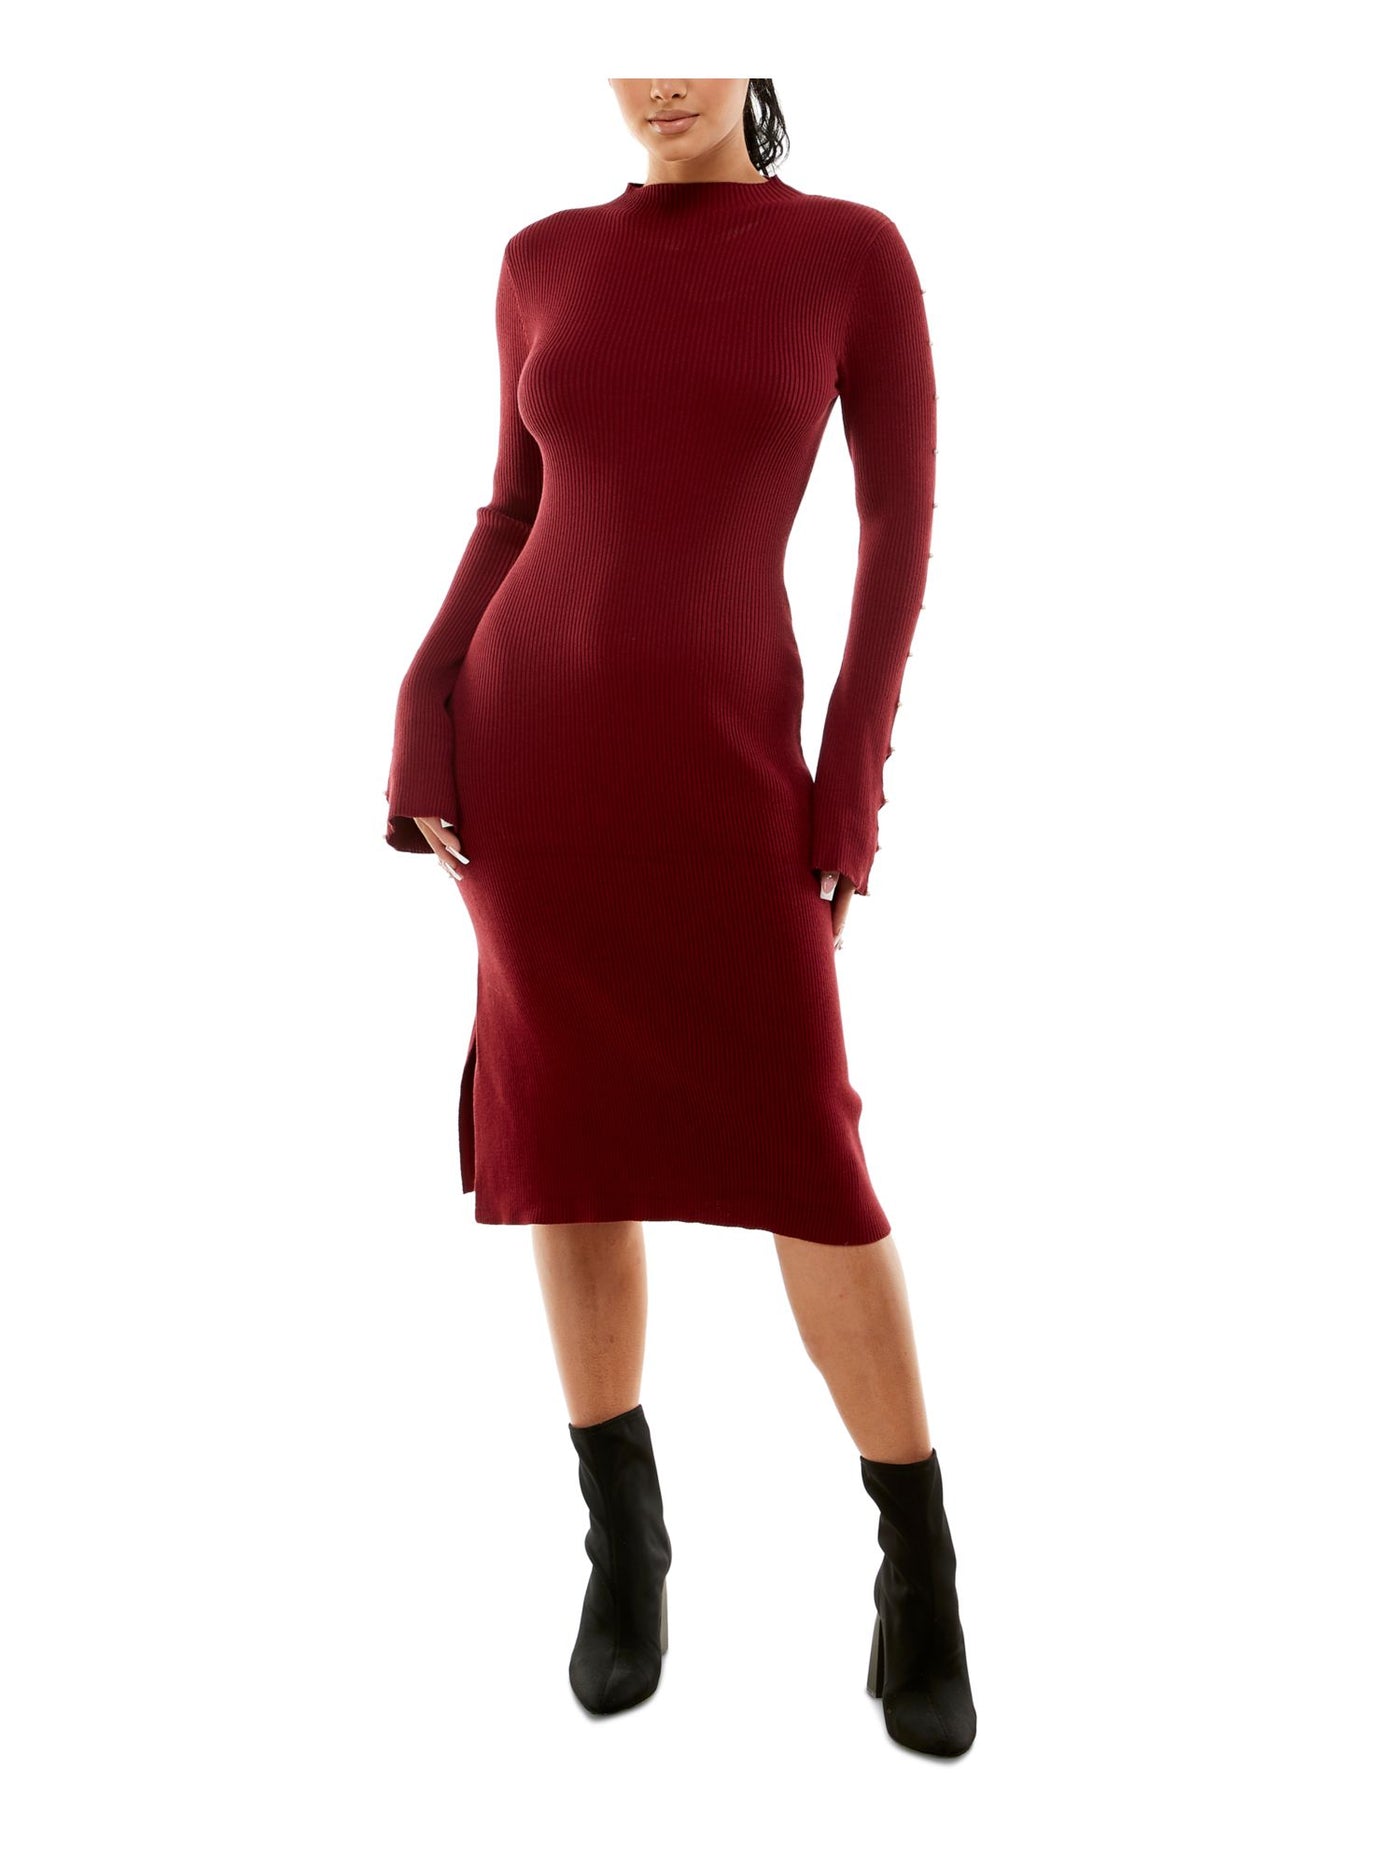 PLANET GOLD Womens Burgundy Cut Out Beaded Ribbed Pullover Long Sleeve Mock Neck Tea-Length Sweater Dress Juniors M